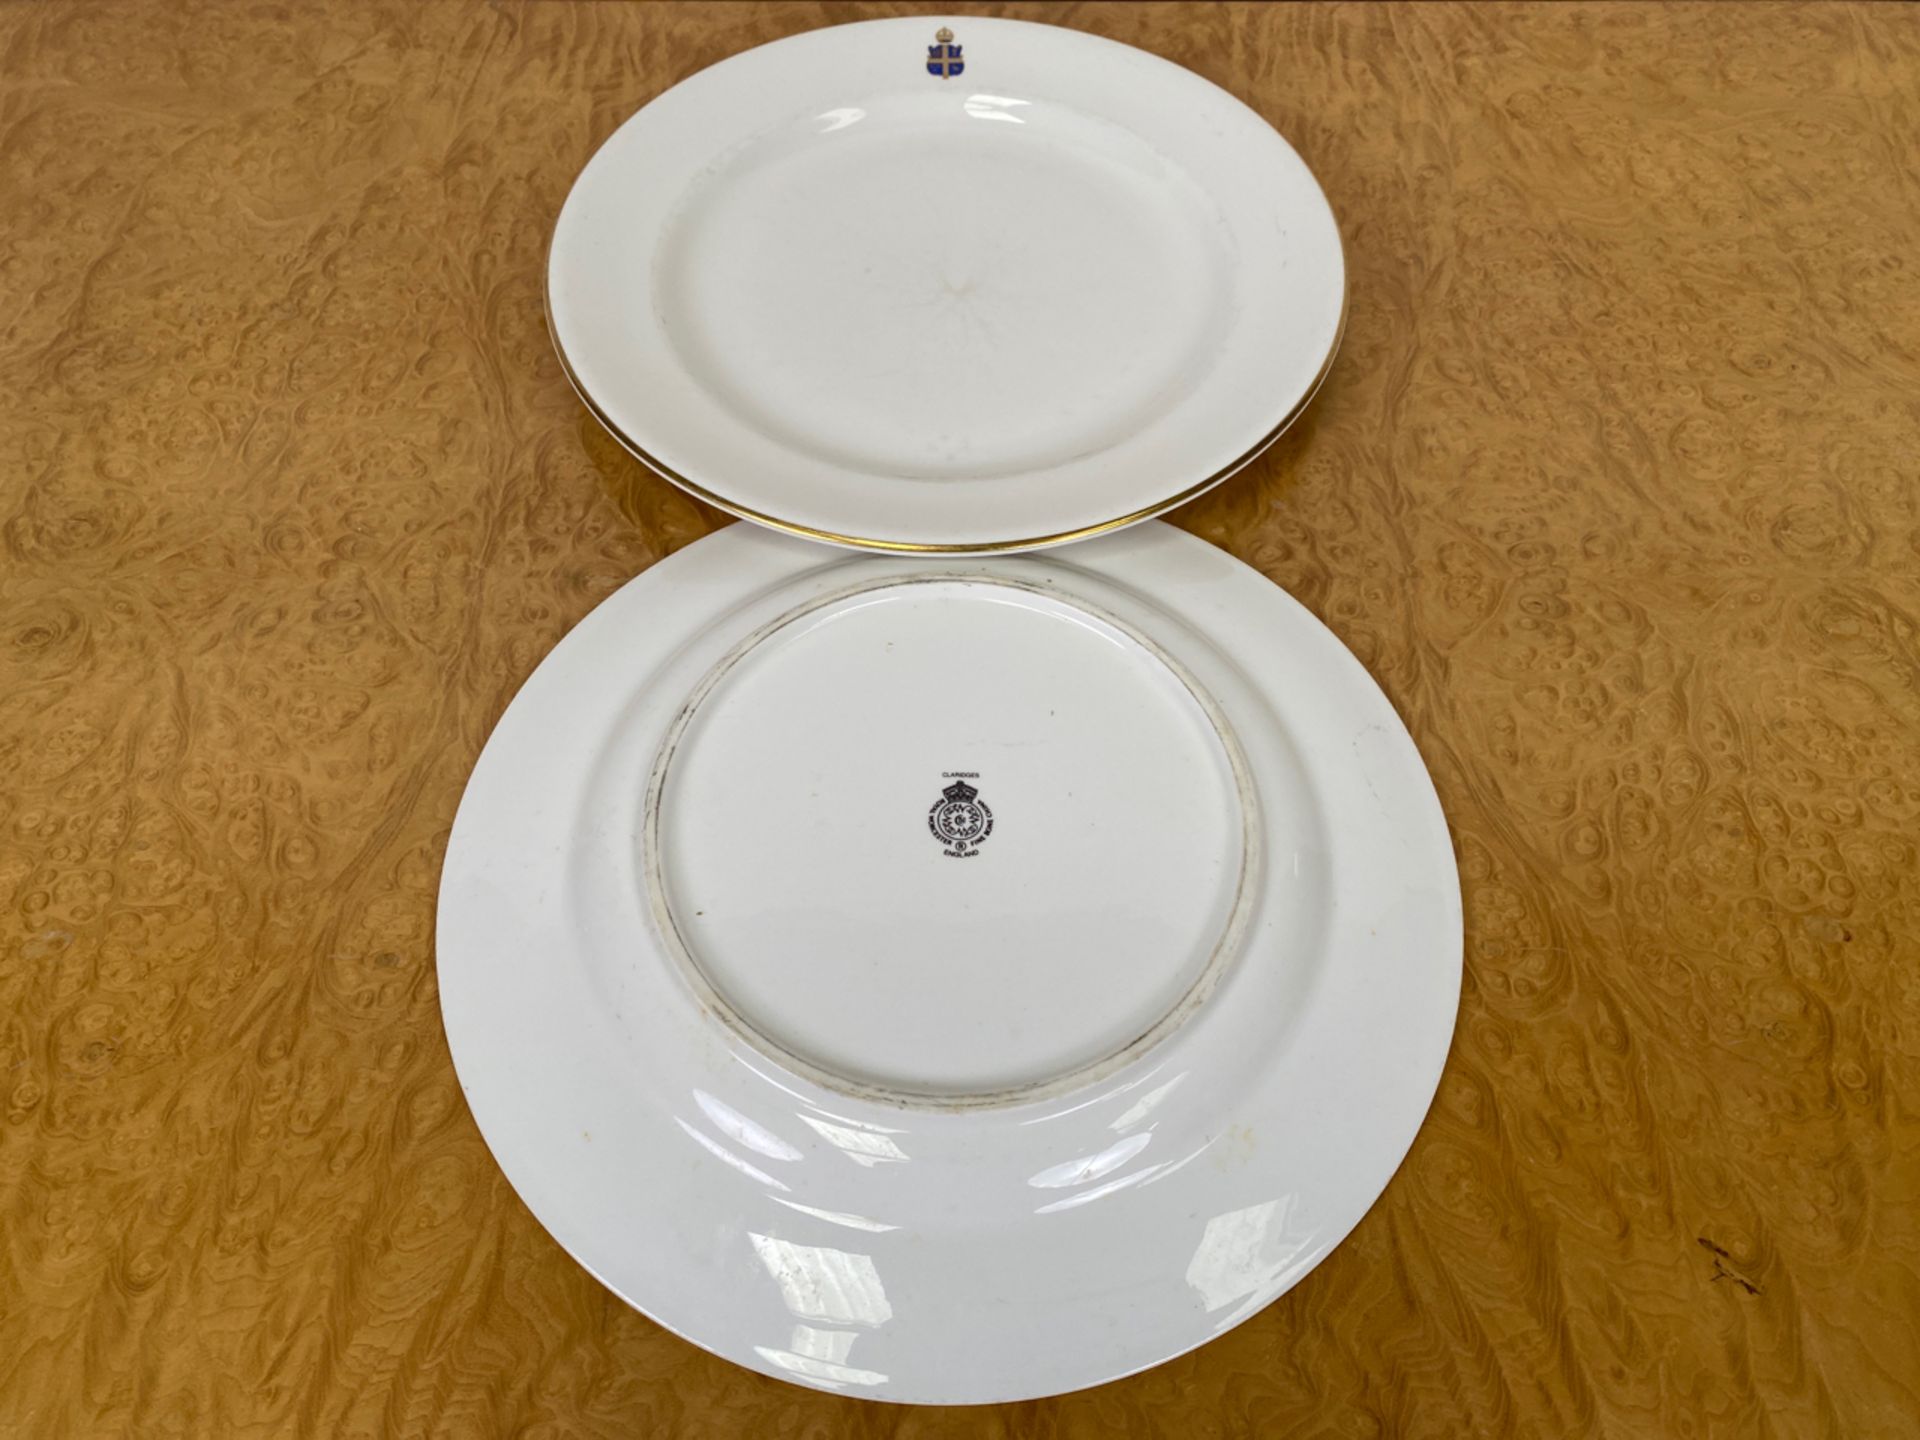 Set of Crested Crockery for Claridge's by Chommette 1884 - Image 26 of 37